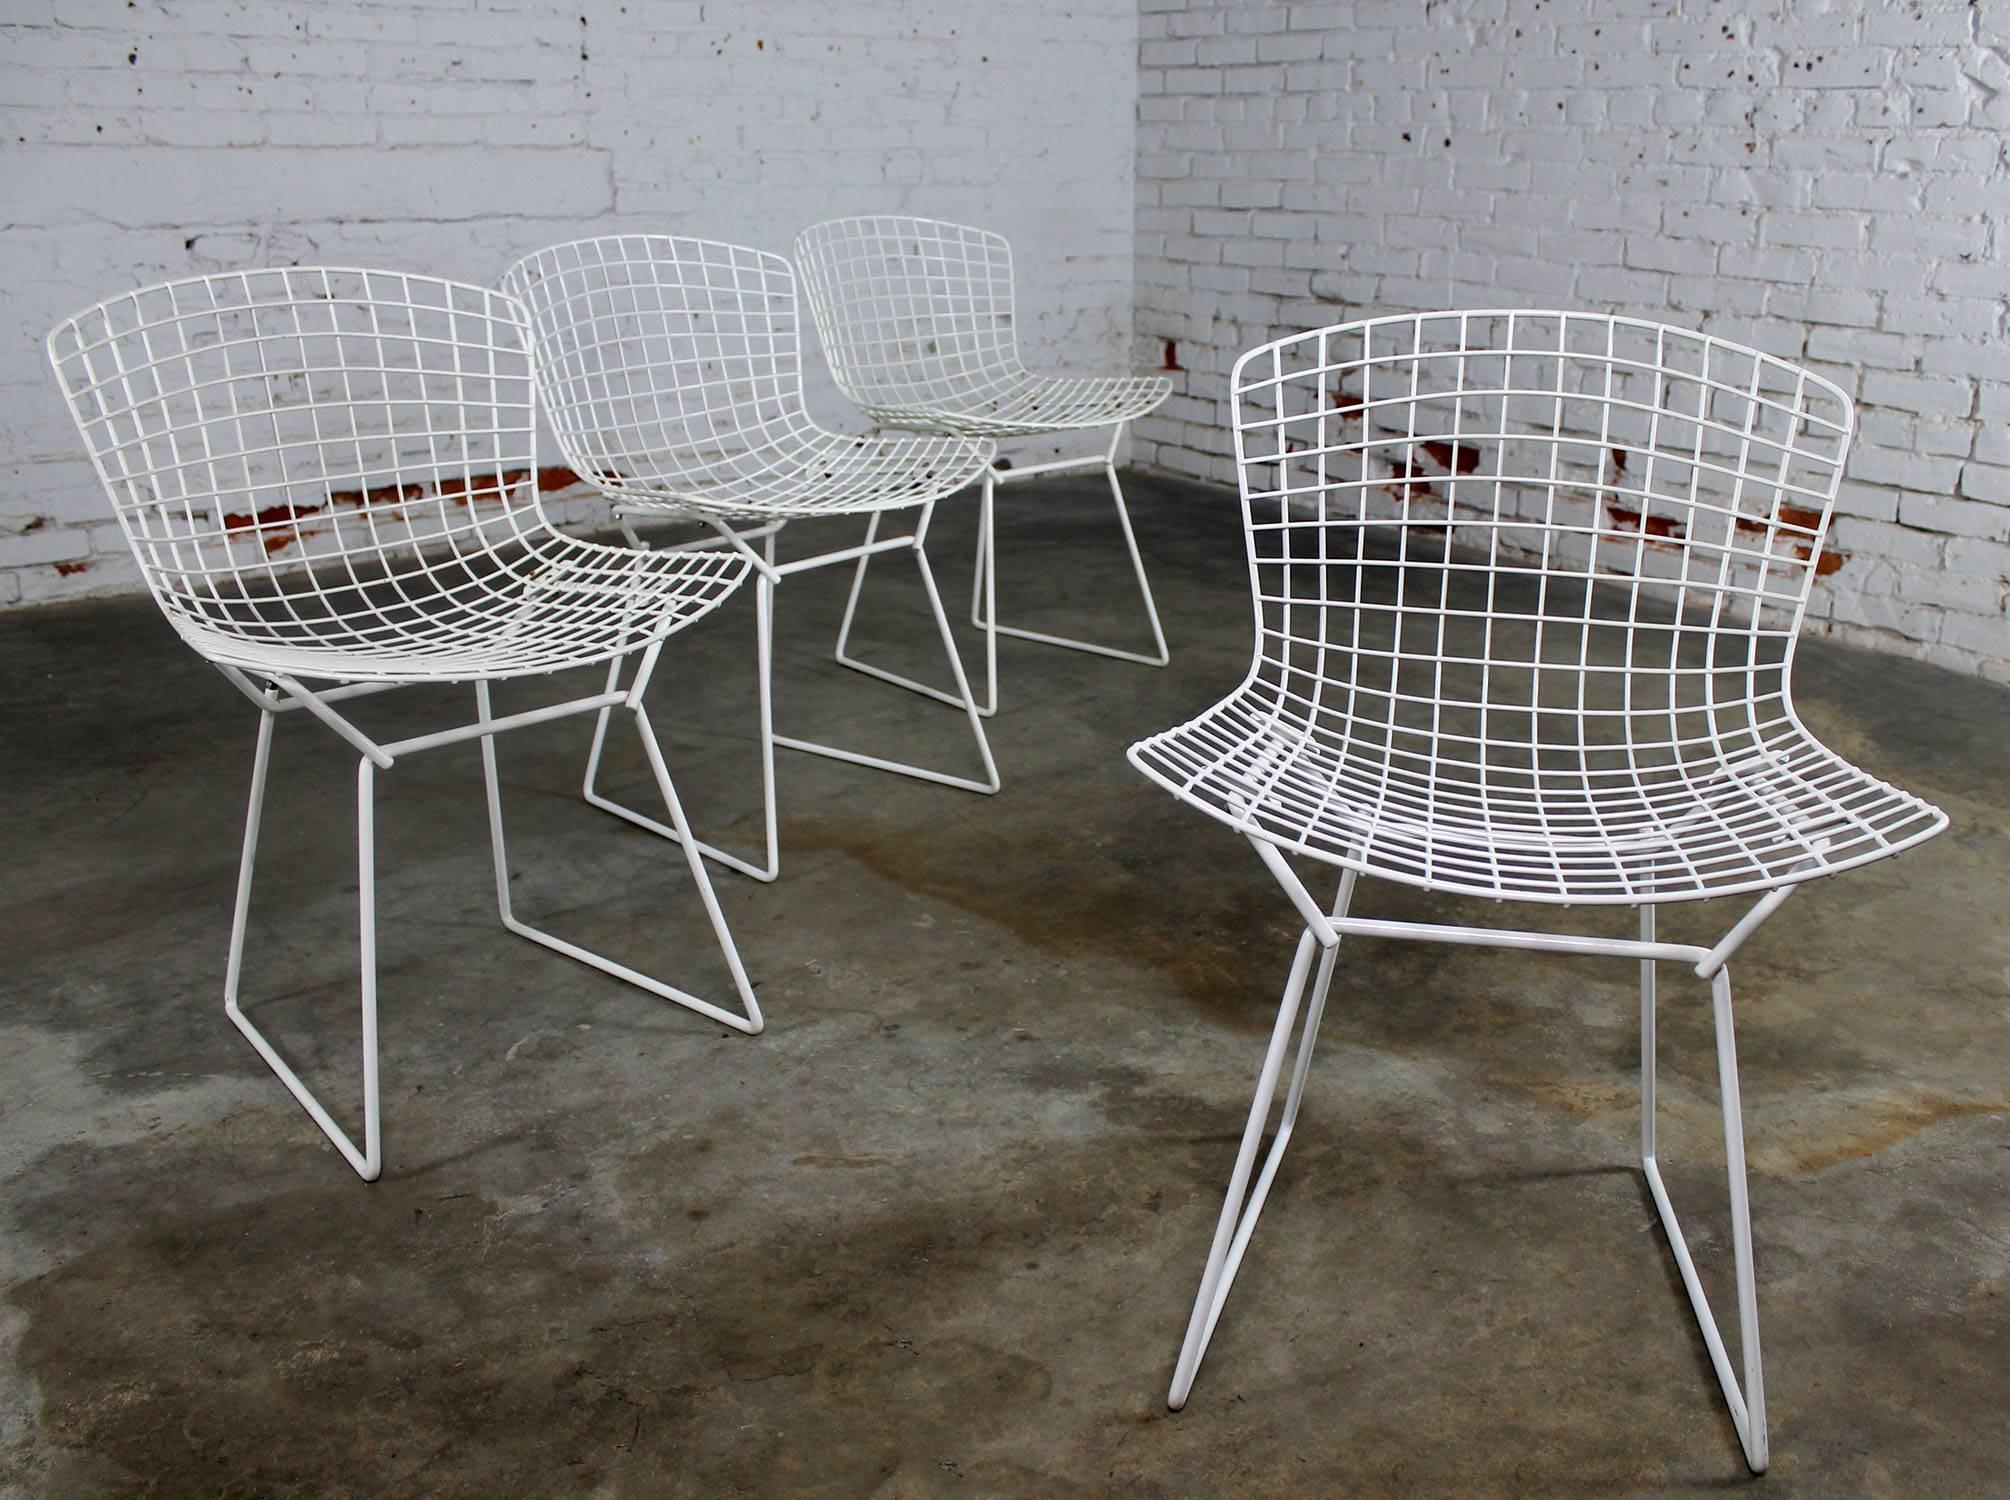 Classic Mid-Century Modern white wire Bertoia side chairs with purple seat cushions, 16 total. Buy one or all. Priced per chair. They are all in good over-all vintage condition. There is some minor chipping and rust spots to the Rilsan coating as